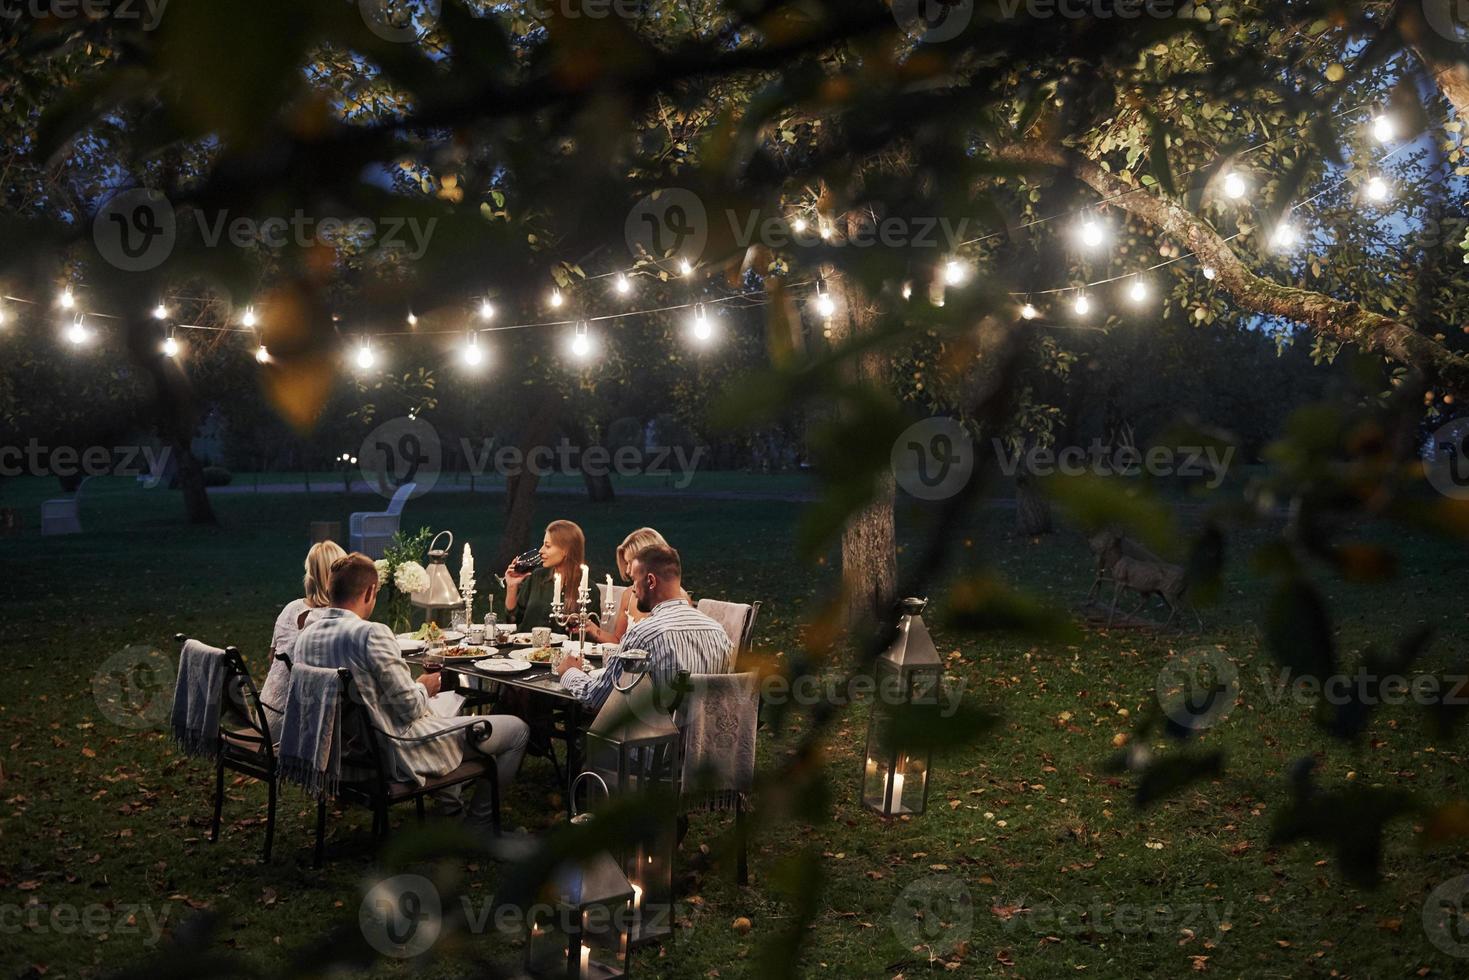 Photo through tree branches with leaves. Evening time. Friends have a dinner in the gorgeous outdoor place